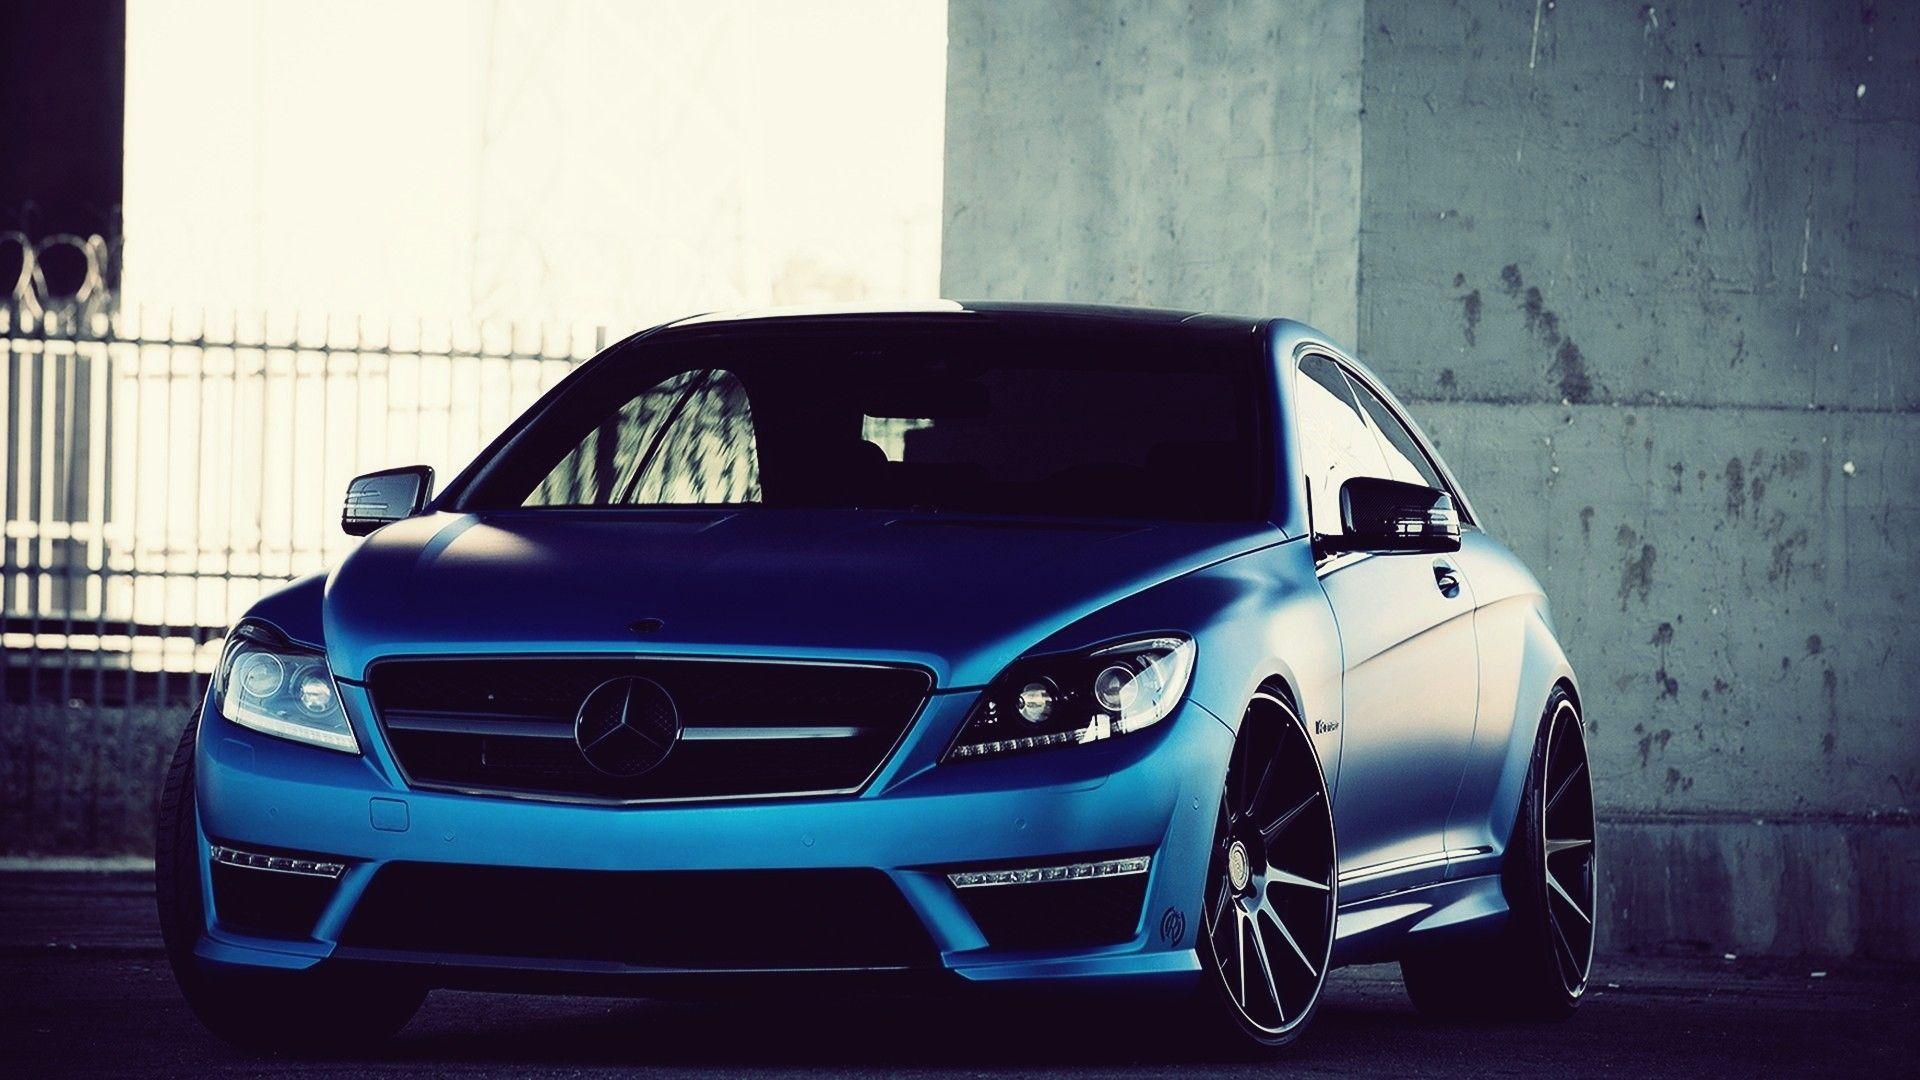 4) 2015 Mercedes C63 AMG Coupe Wallpaper